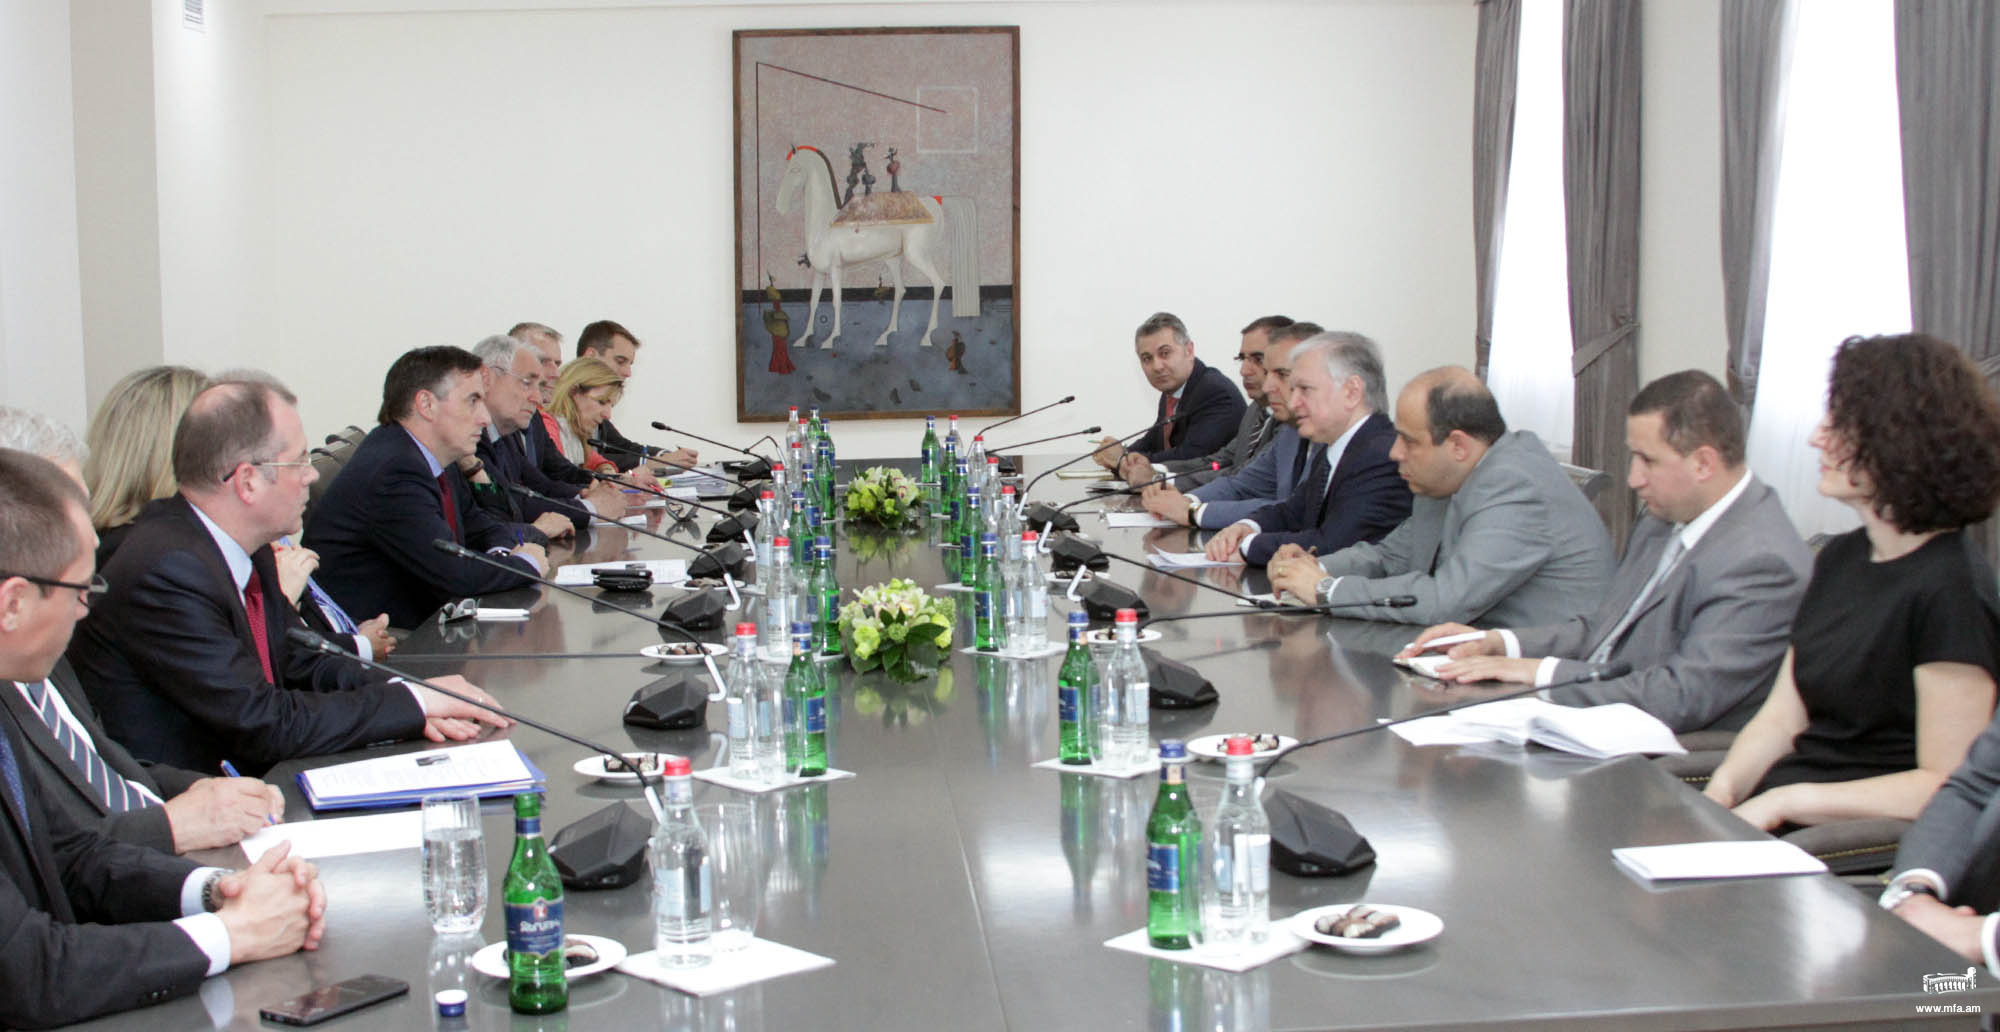 Head of Ministry of Foreign Affairs of Armenia received the Chairman of the European Parliament Foreign Affairs Committee